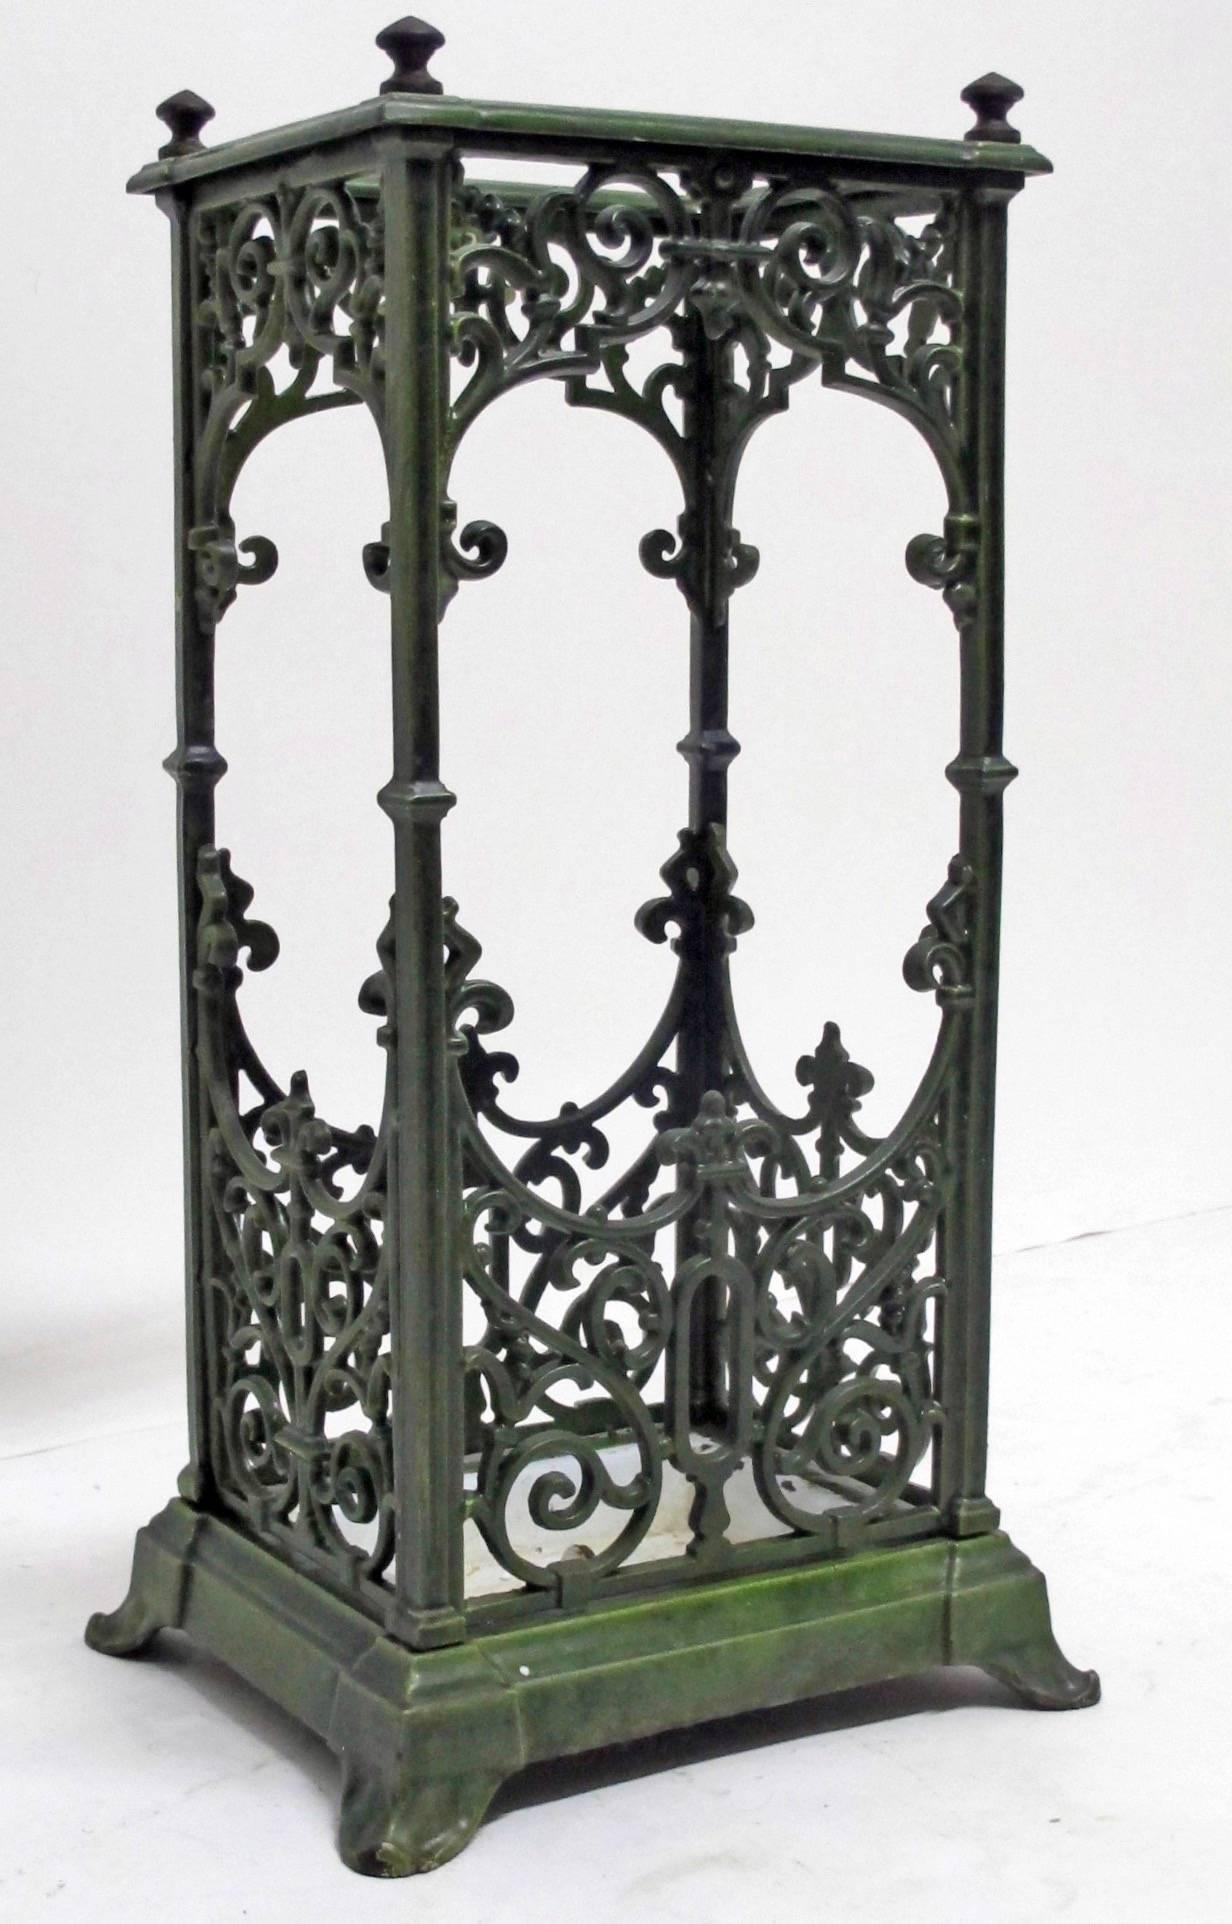 Heavy green enameled cast iron umbrella stand in very good original antique condition. Having some minor and expected chips to the enamel glaze. European, late 19th-early 20th century.